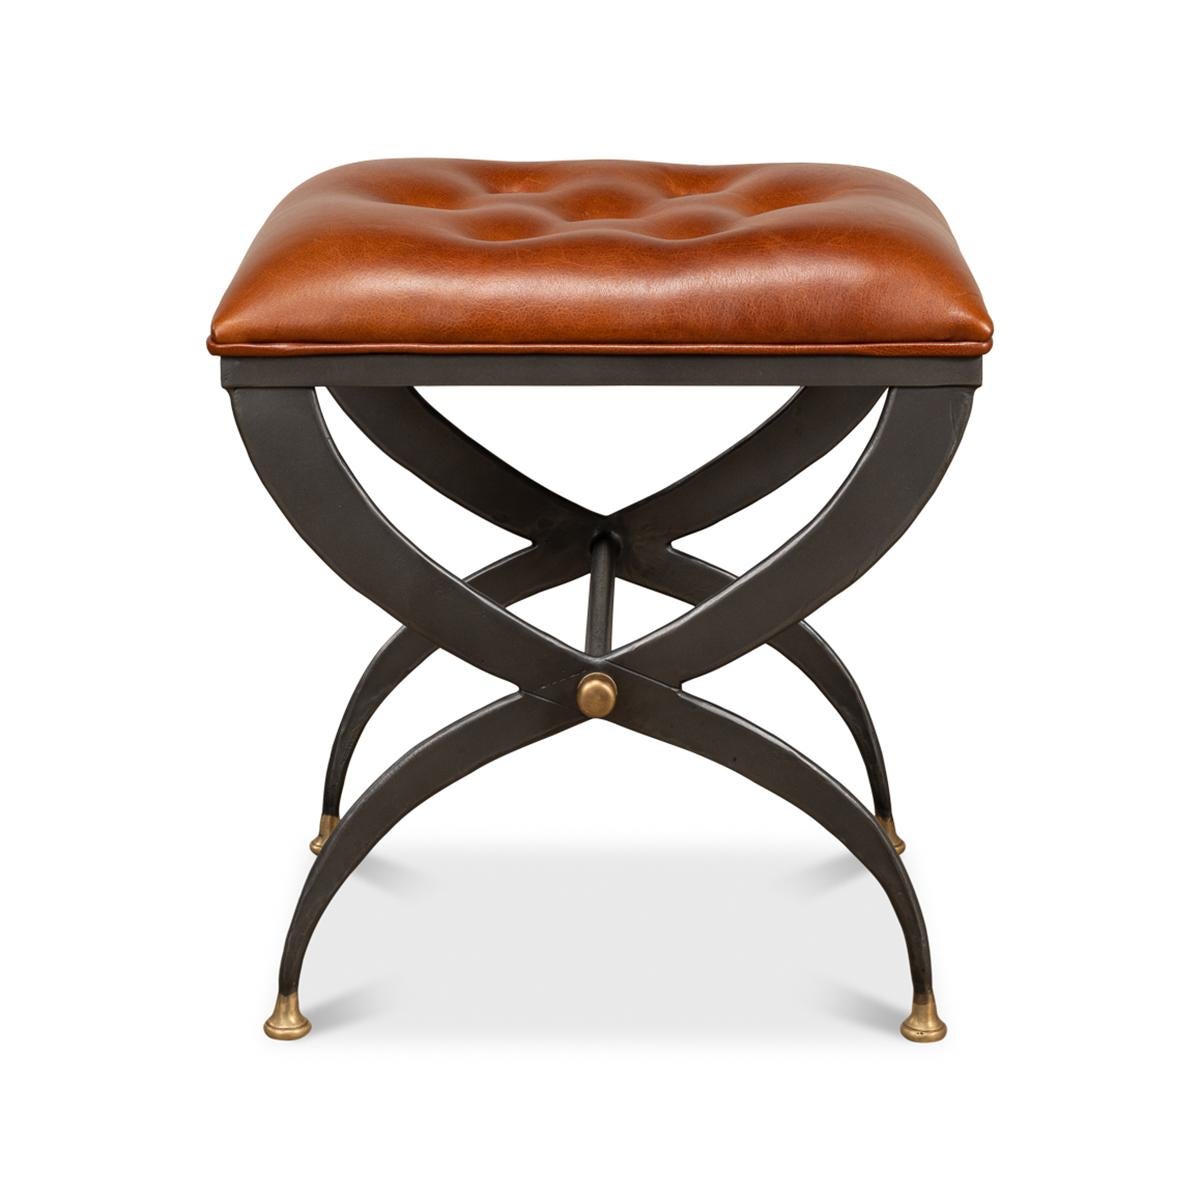 A Modern curule stool with a button tufted leather cushion seat above a pewter-finished iron curule form base with gilded accents.

Dimensions: 20